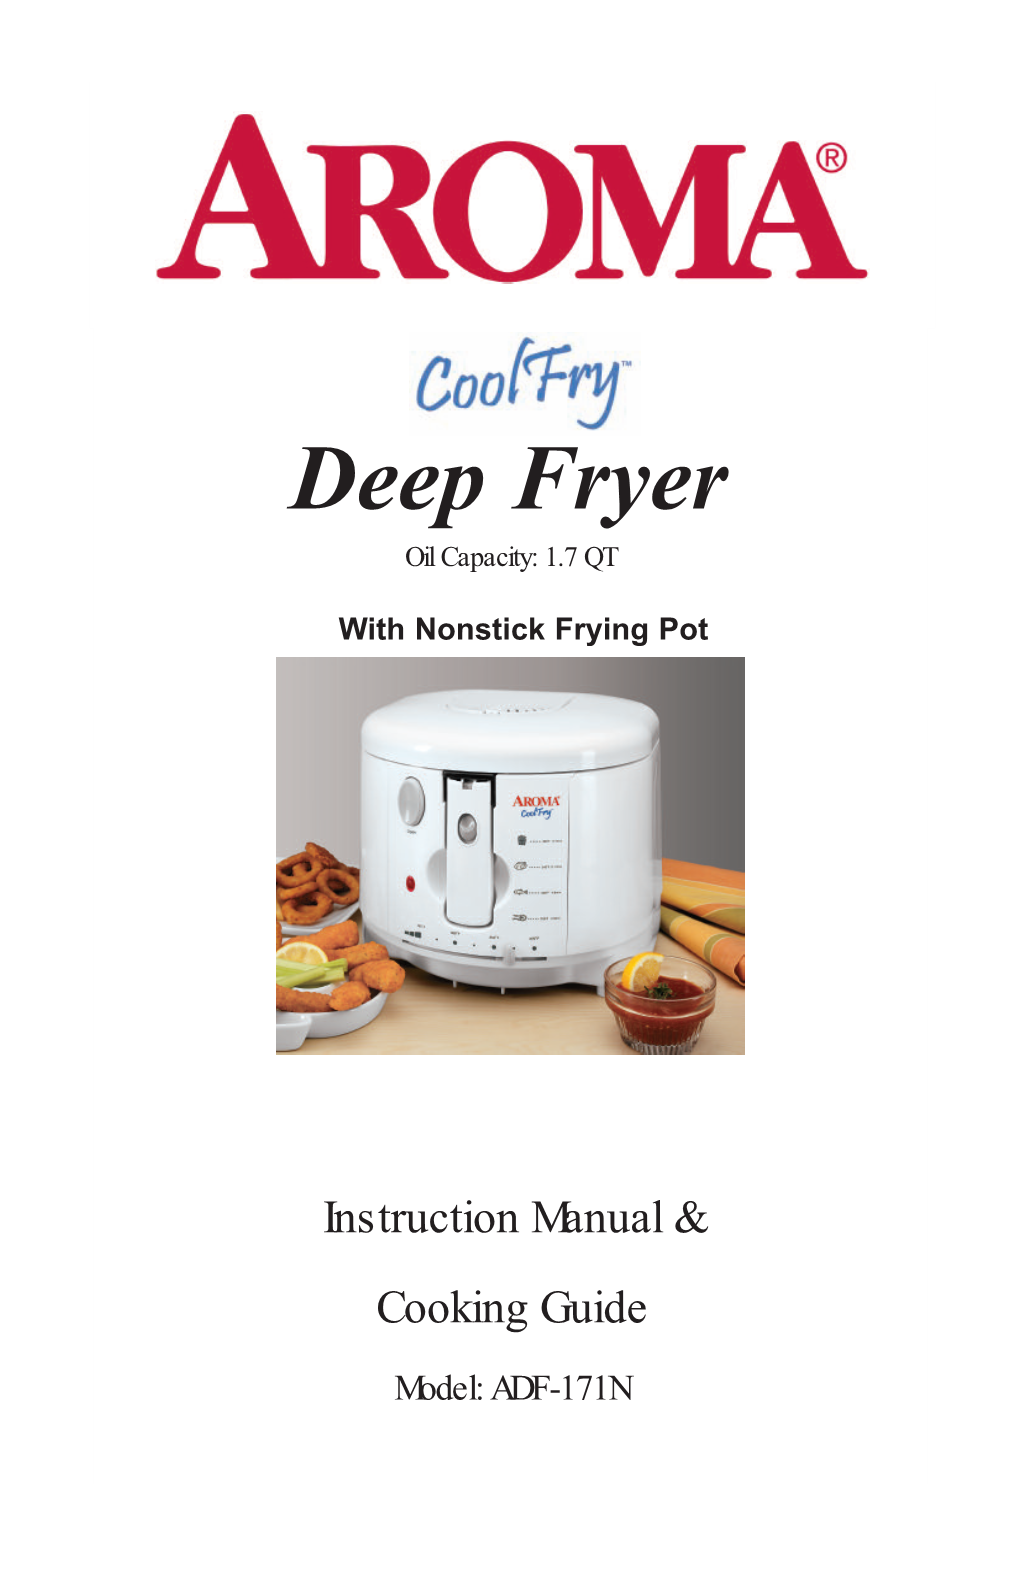 Deep Fryer This Warranty Does Not Cover Improper Installation, Misuse, Abuse Or Neglect on the Oil Capacity: 1.7 QT Part of the Owner